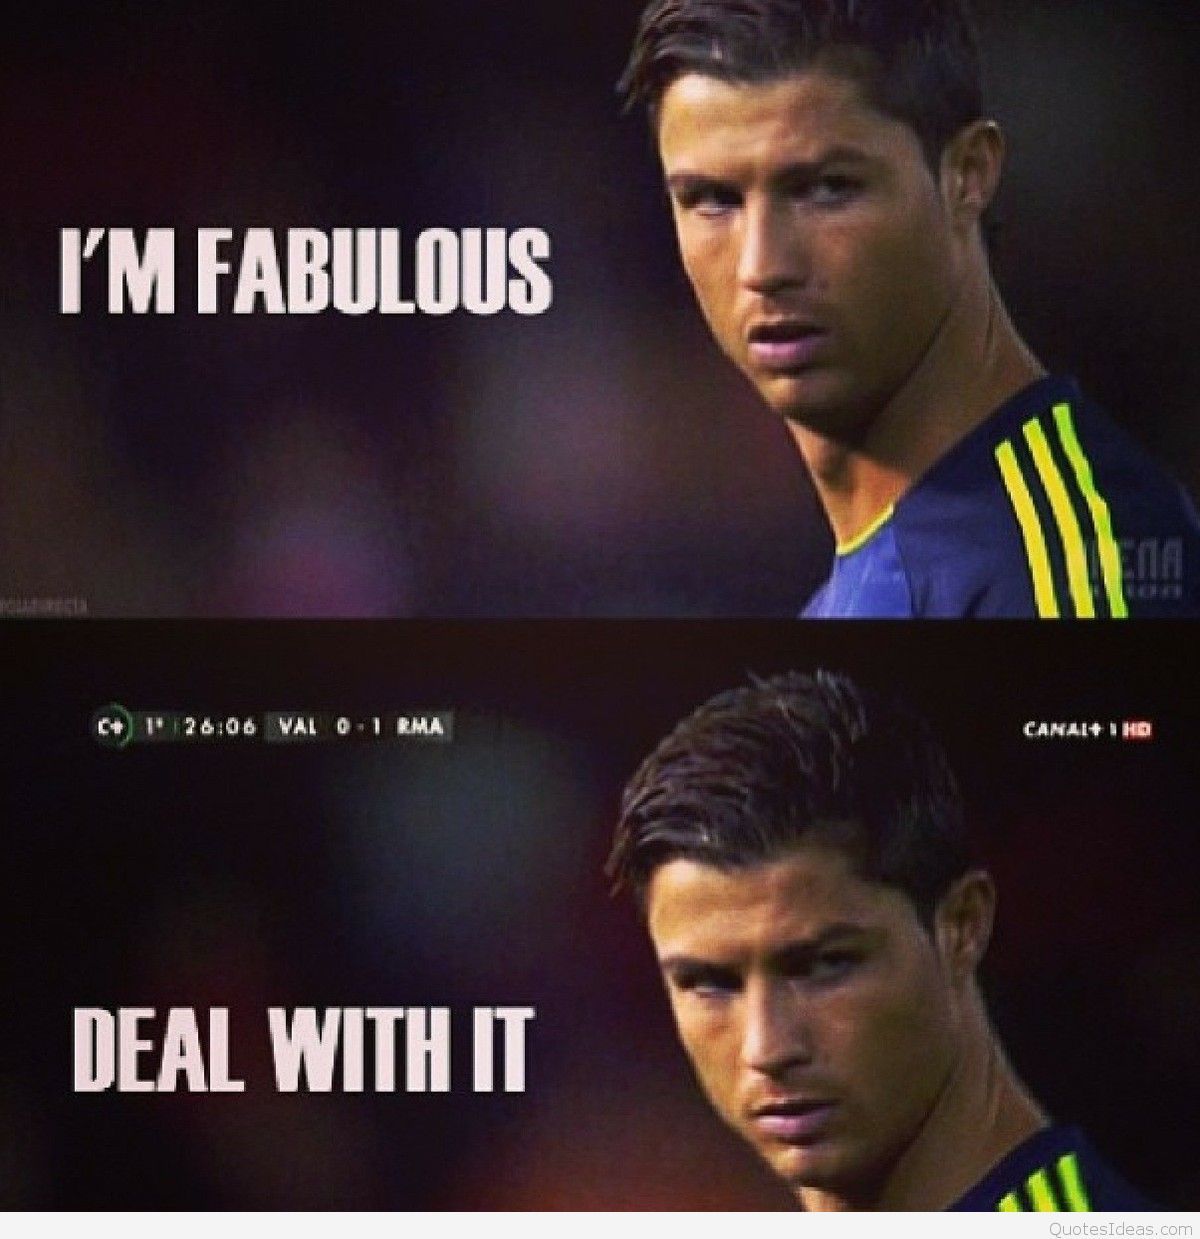 Best Cristiano Ronaldo Quotes Wallpapers and Image hd